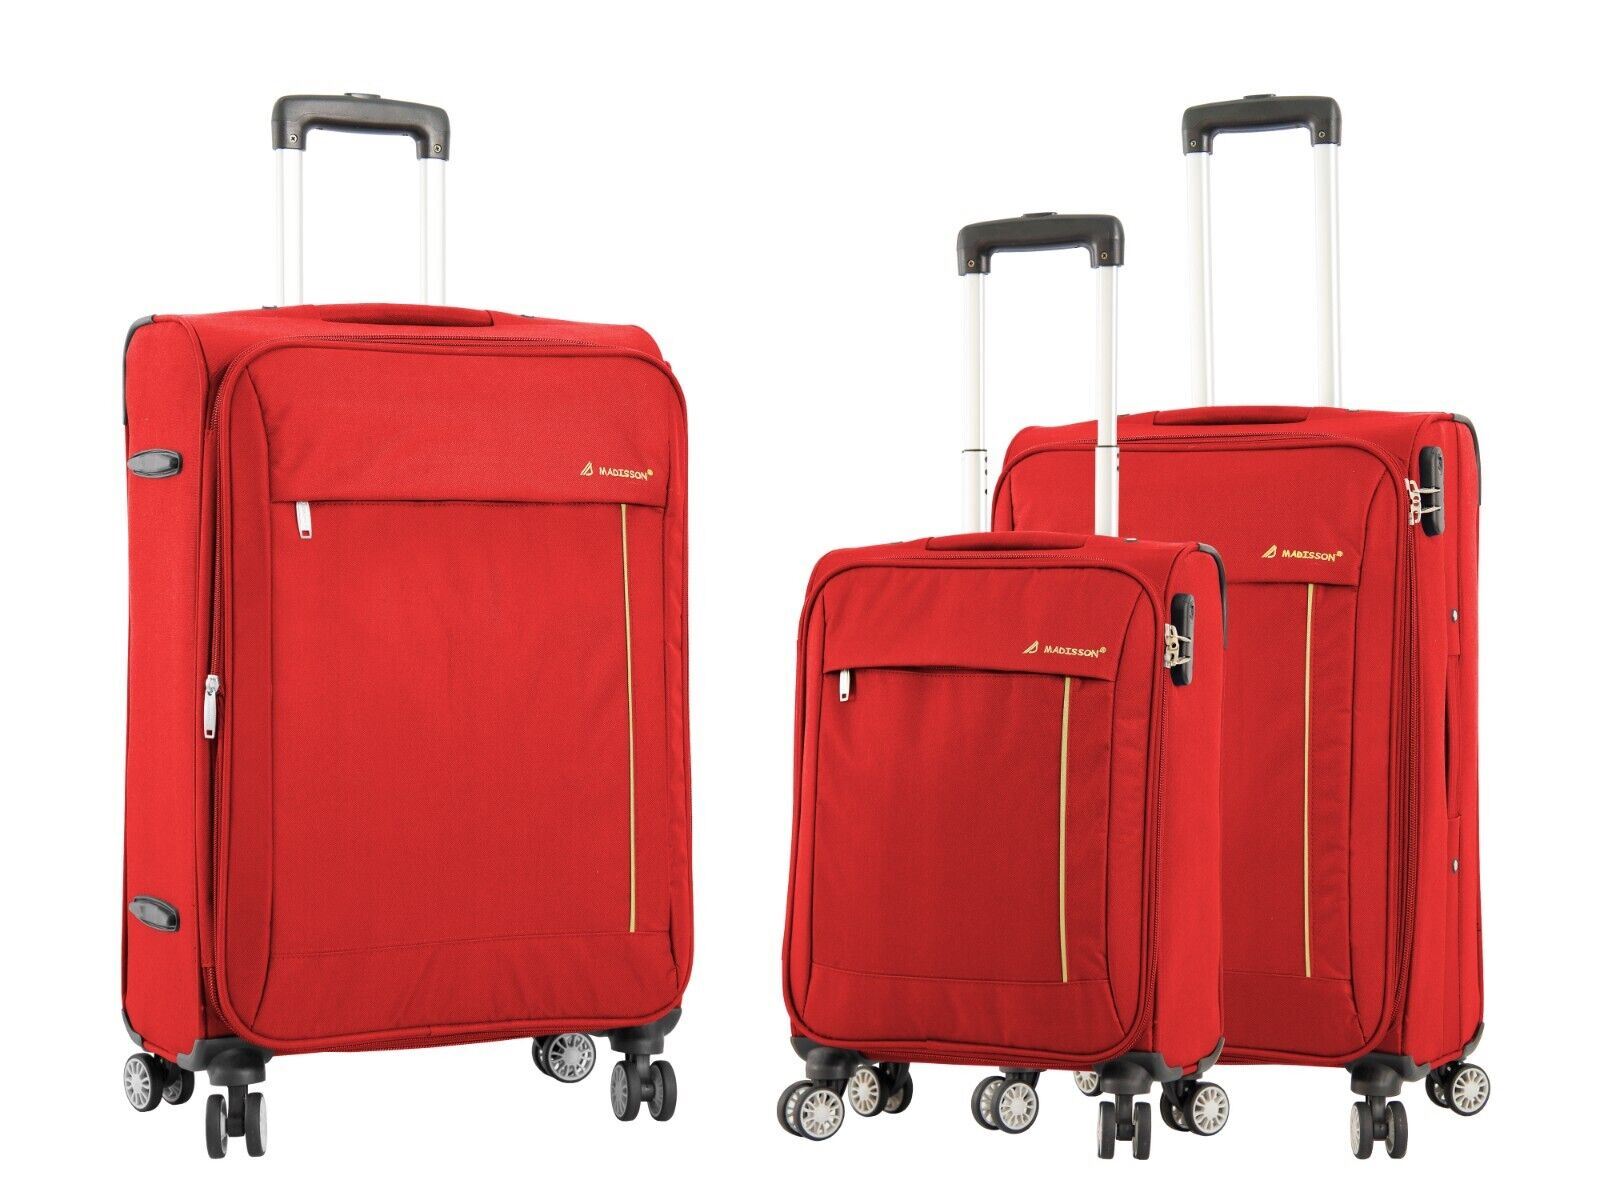 Carrollton Set of 3 Soft Shell Suitcase in Red